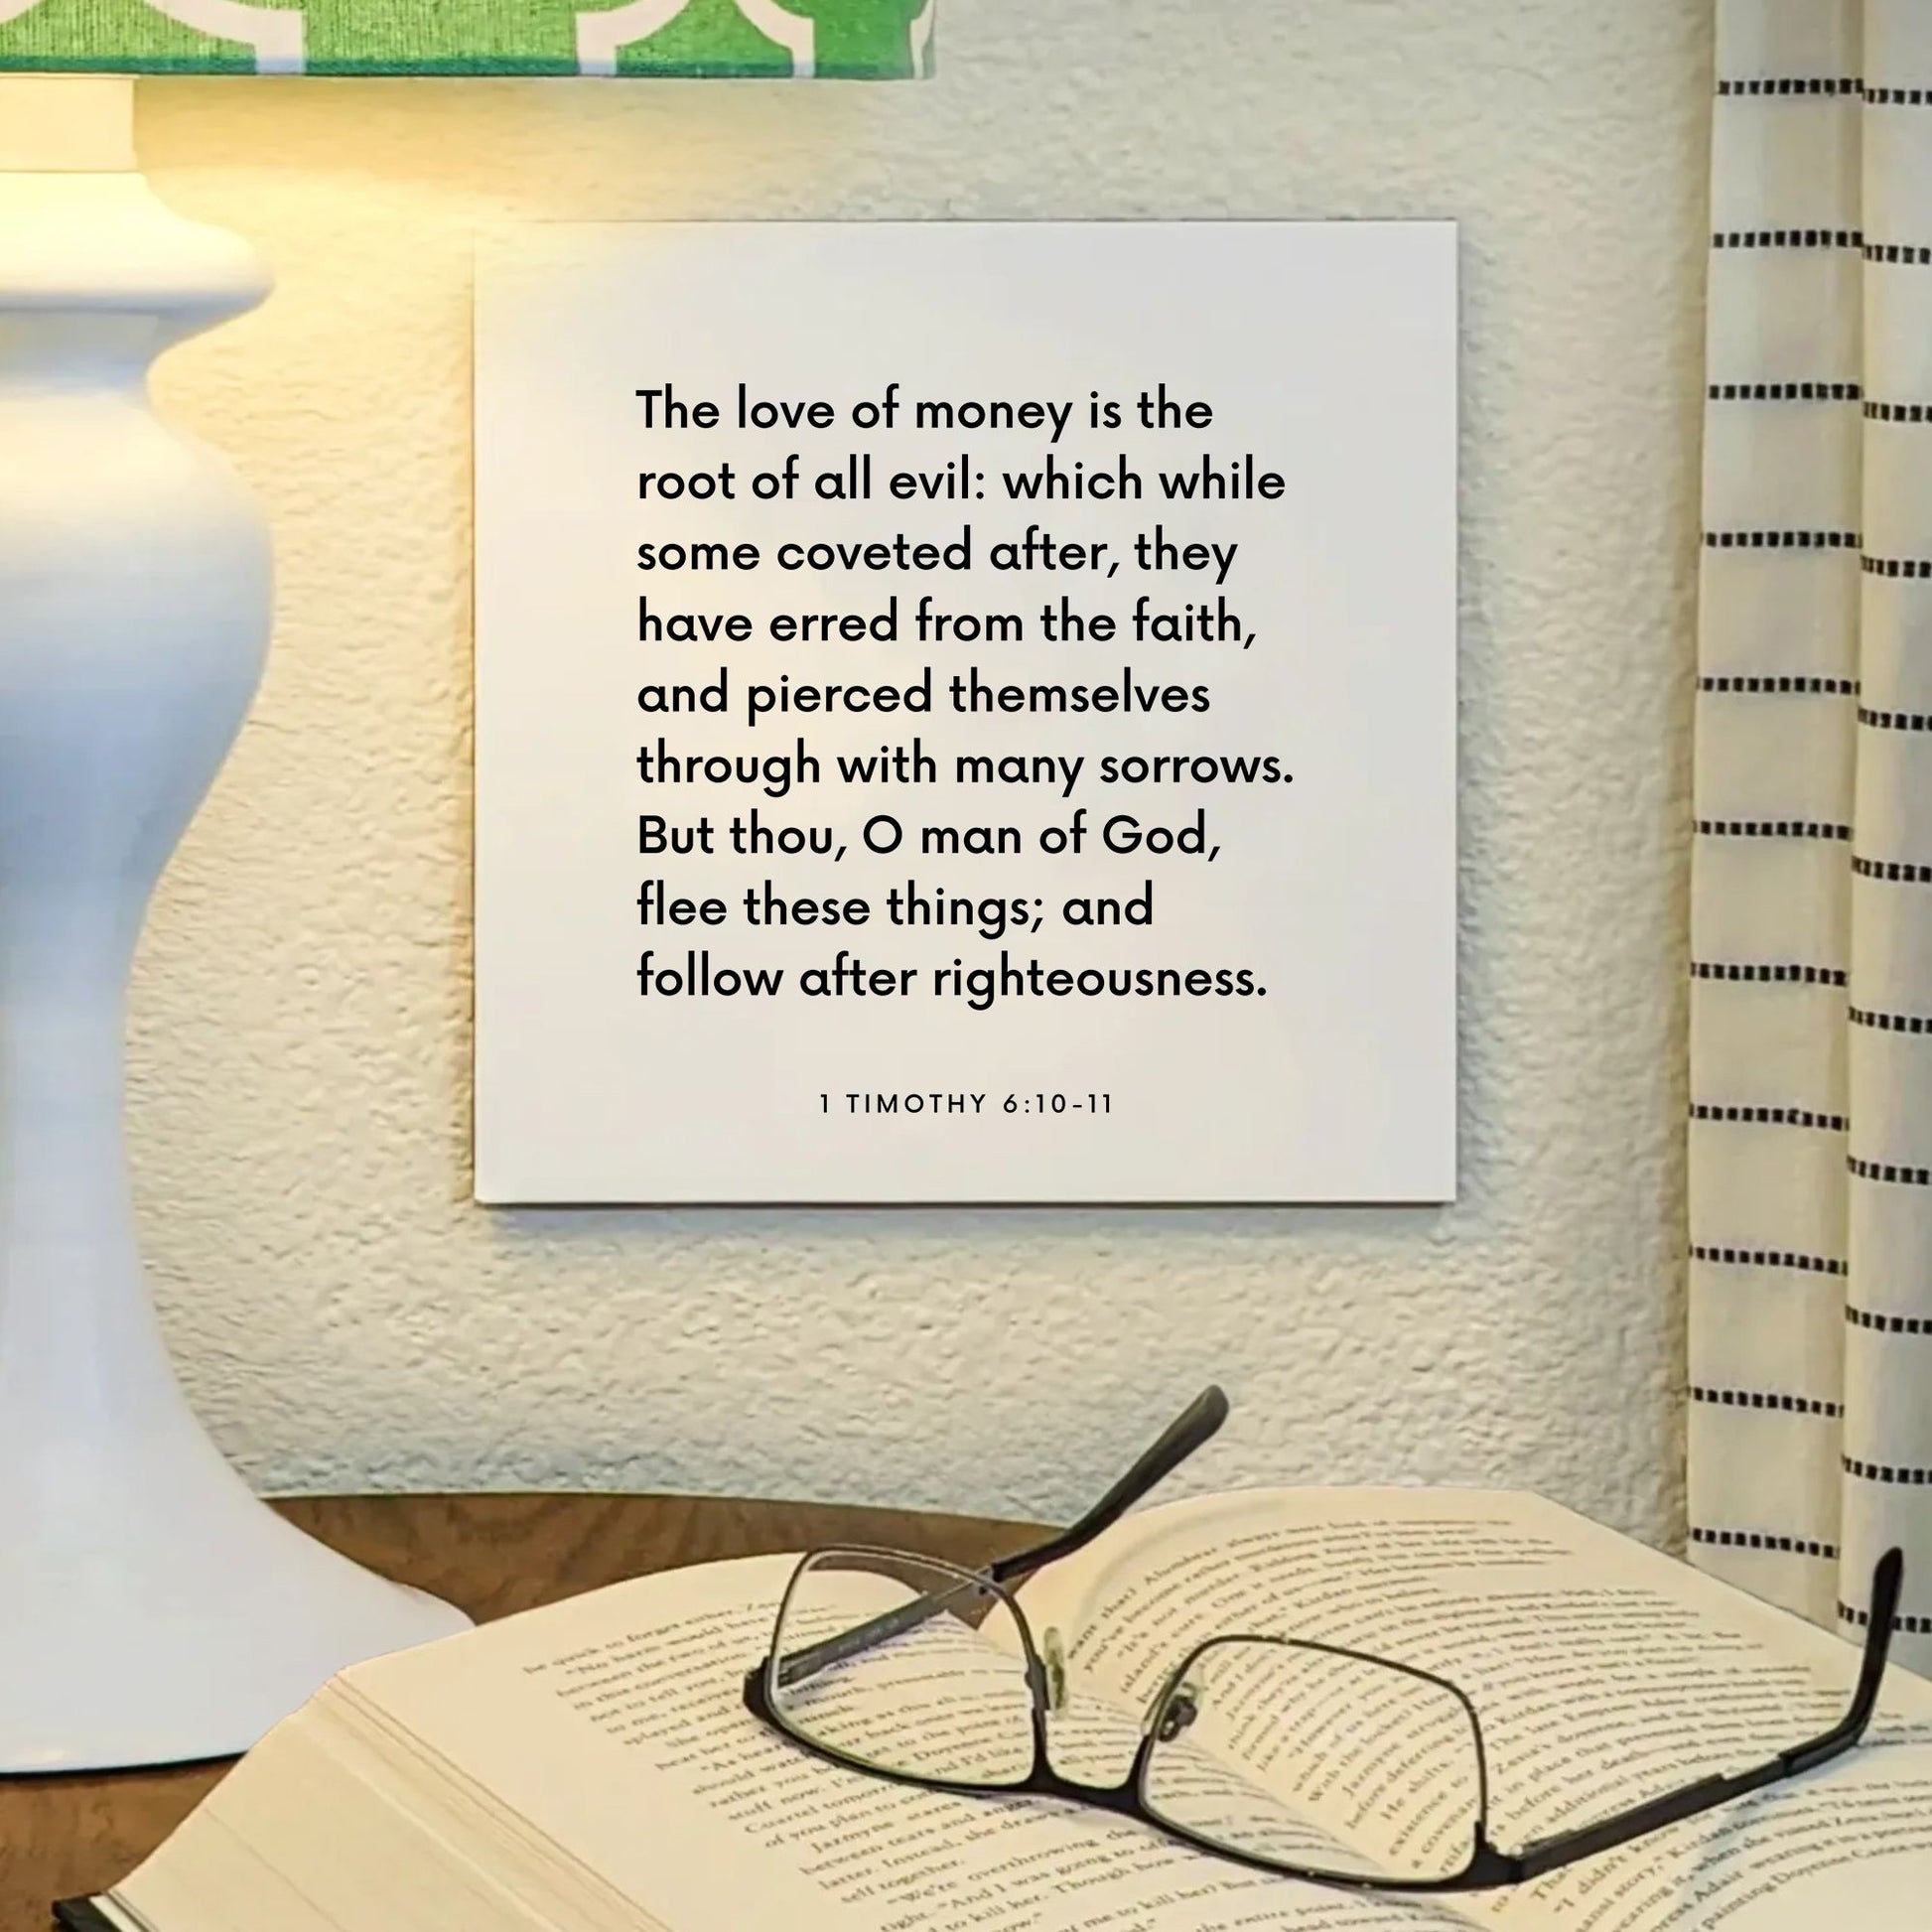 Lamp mouting of the scripture tile for 1 Timothy 6:10-11 - "The love of money is the root of all evil"